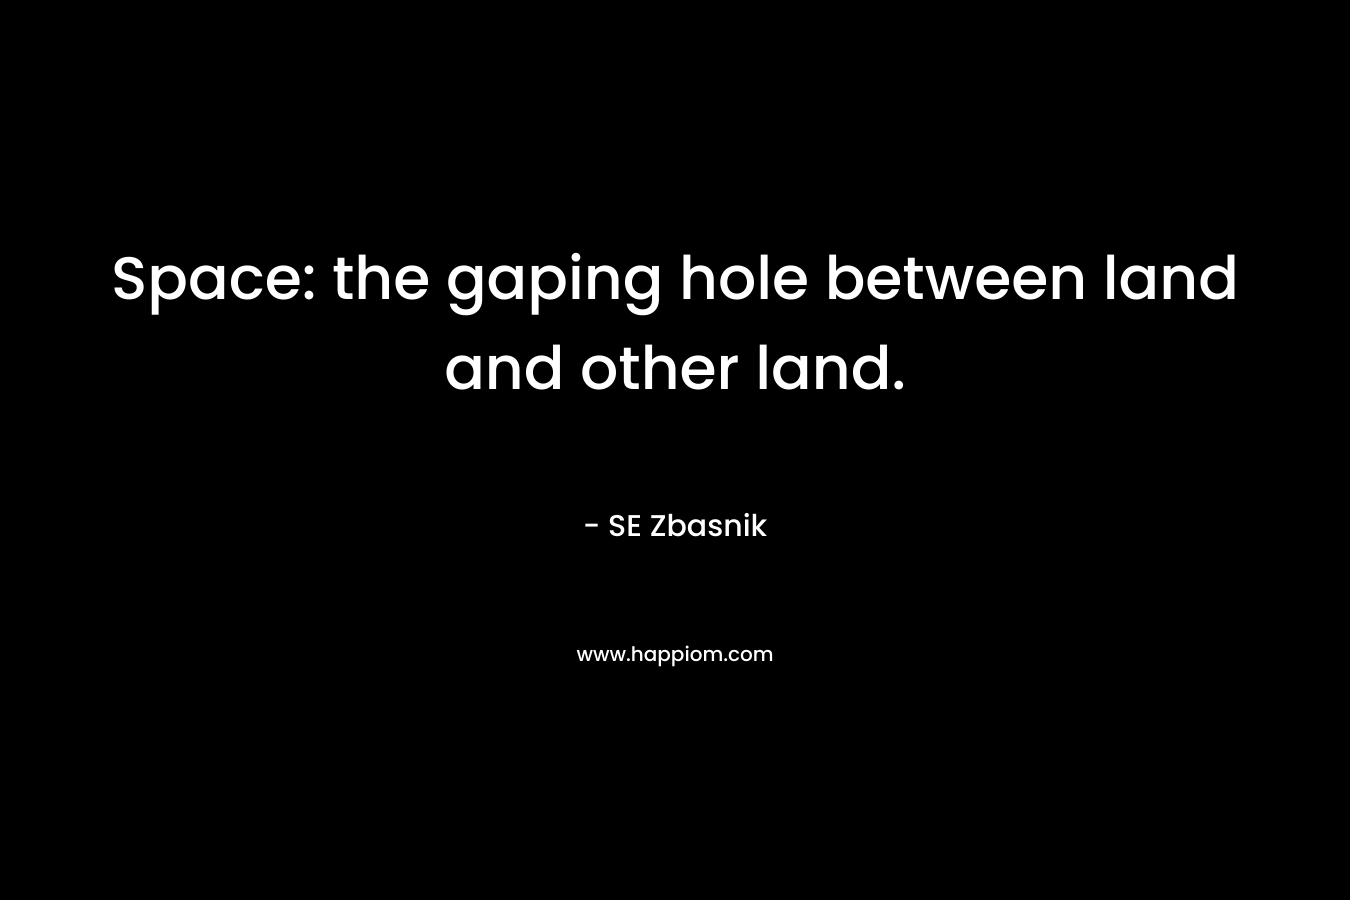 Space: the gaping hole between land and other land.